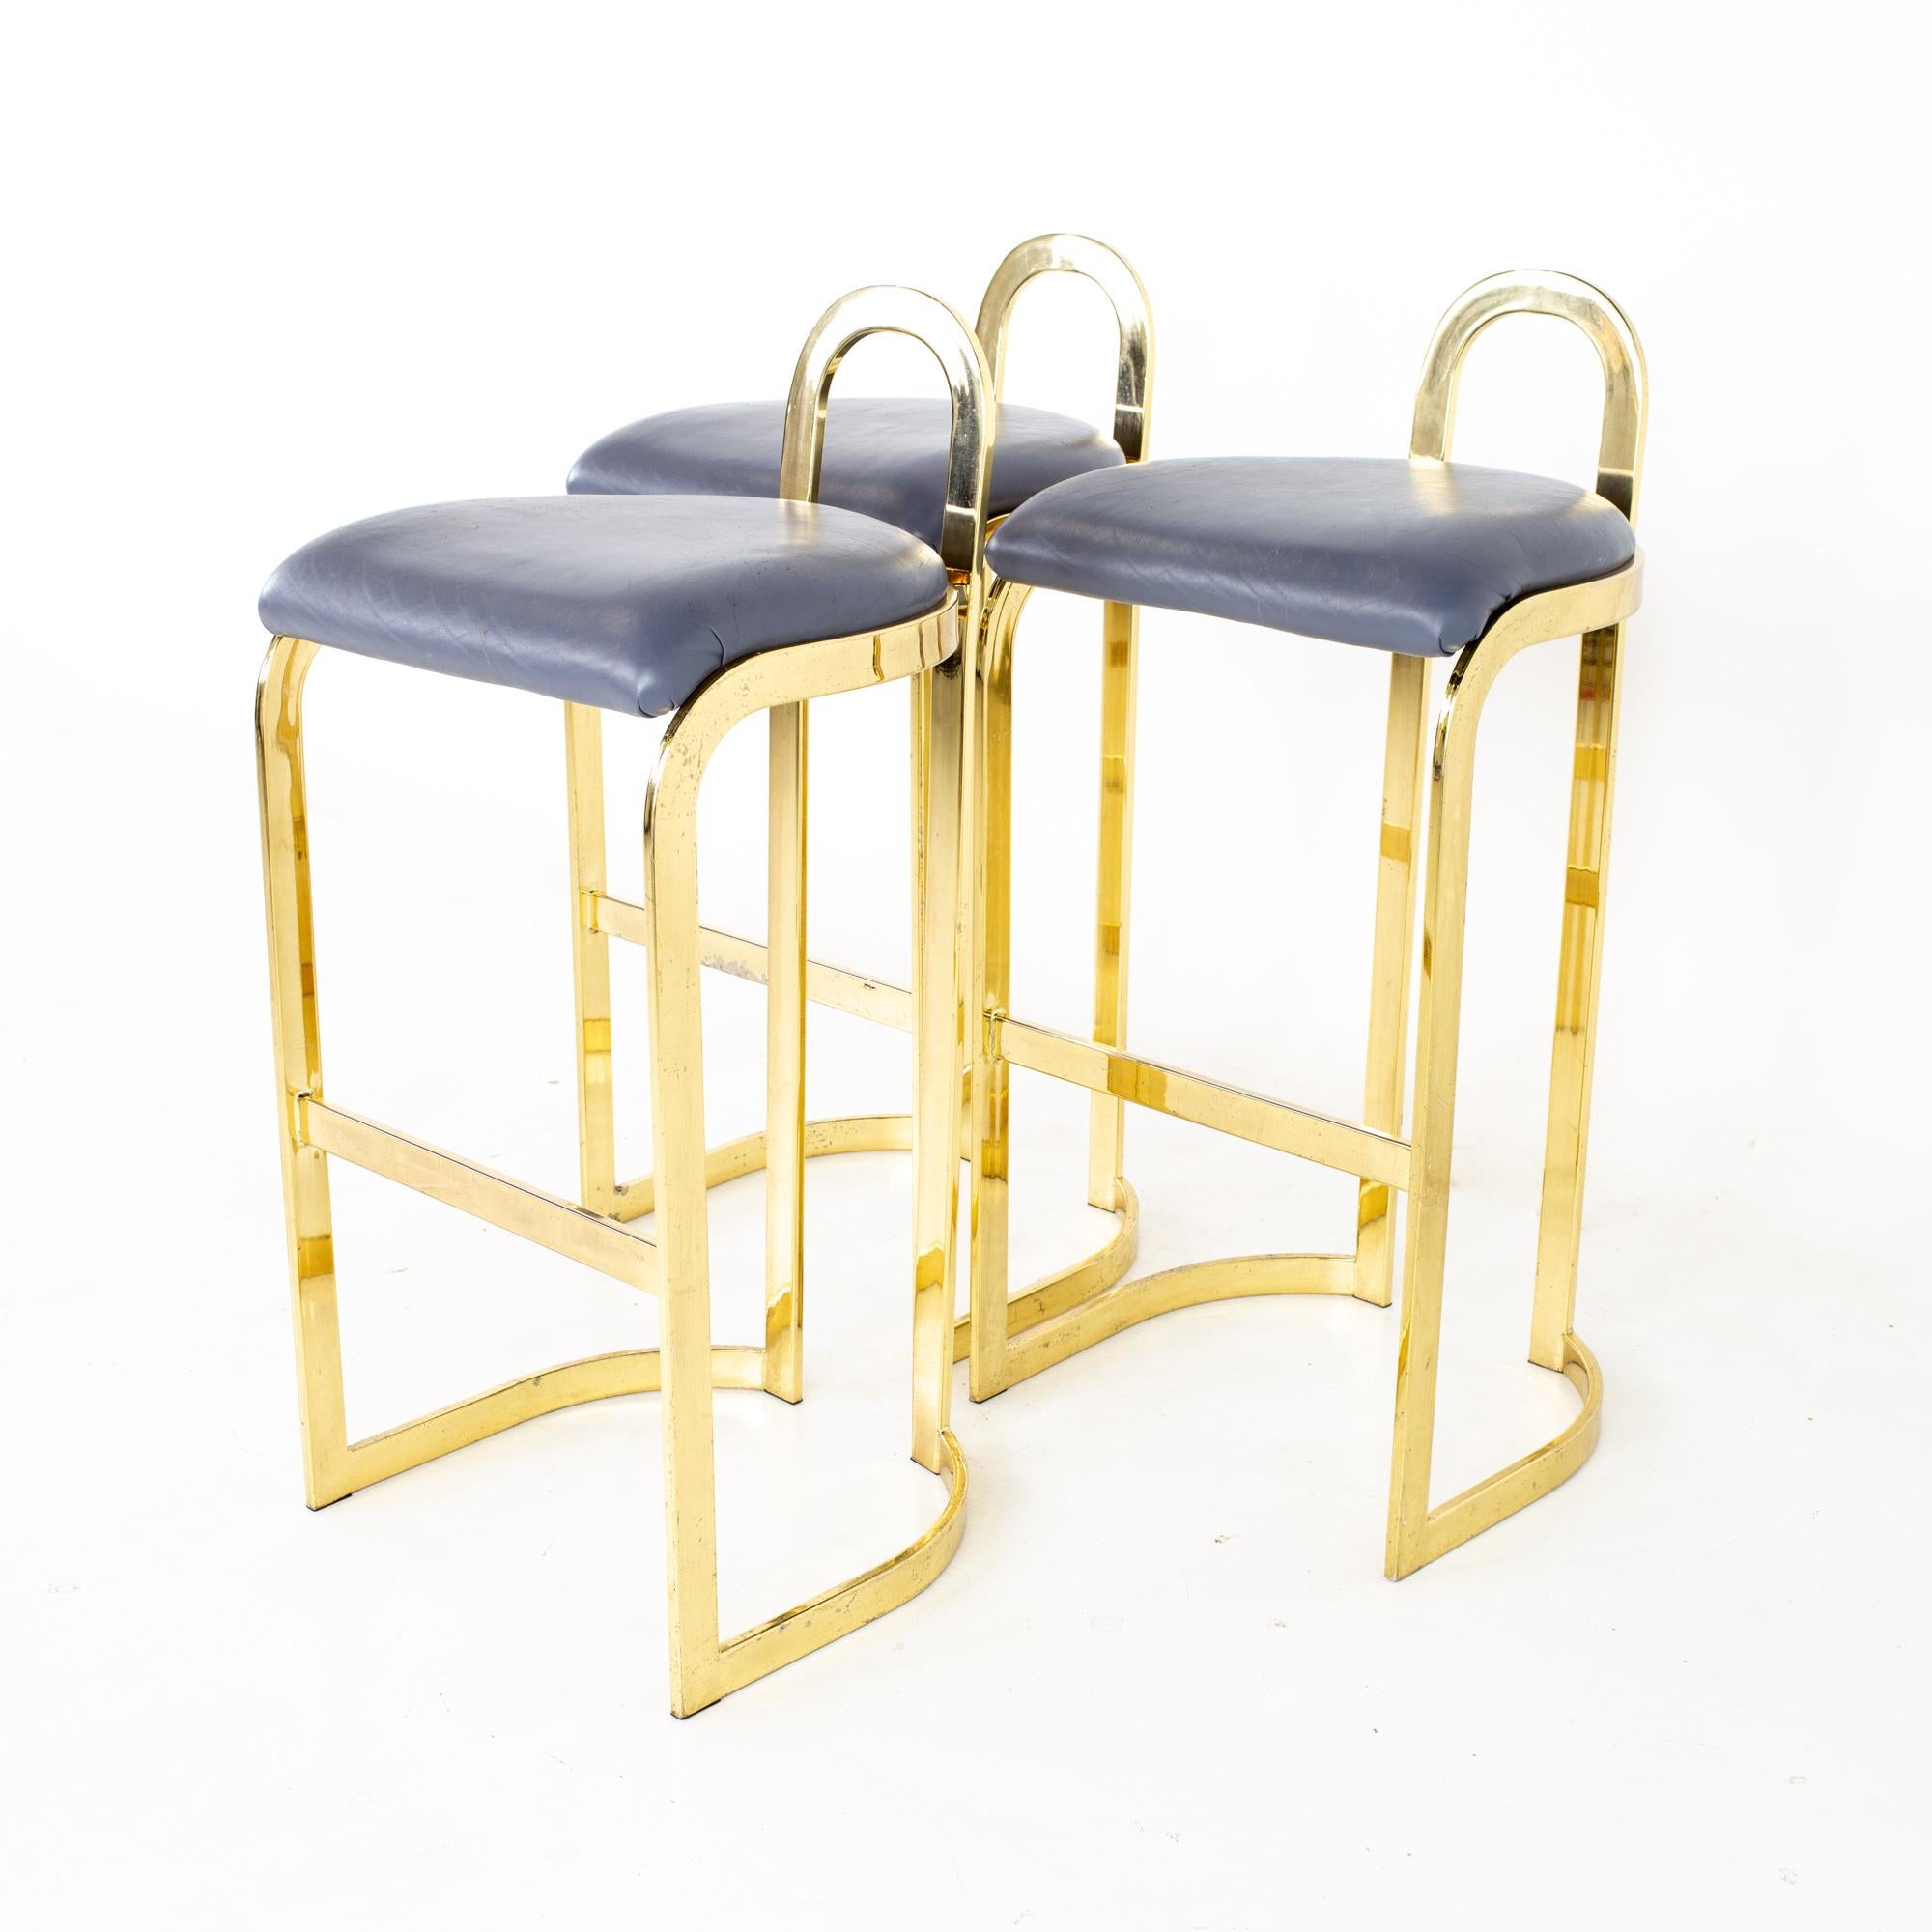 Mid century post modern brass bar stools - set of 3
Bar stools measures: 18.5 wide x 17.75 deep x 38.25 high, with a seat height of 31.75 inches 

All pieces of furniture can be had in what we call restored vintage condition. That means the piece